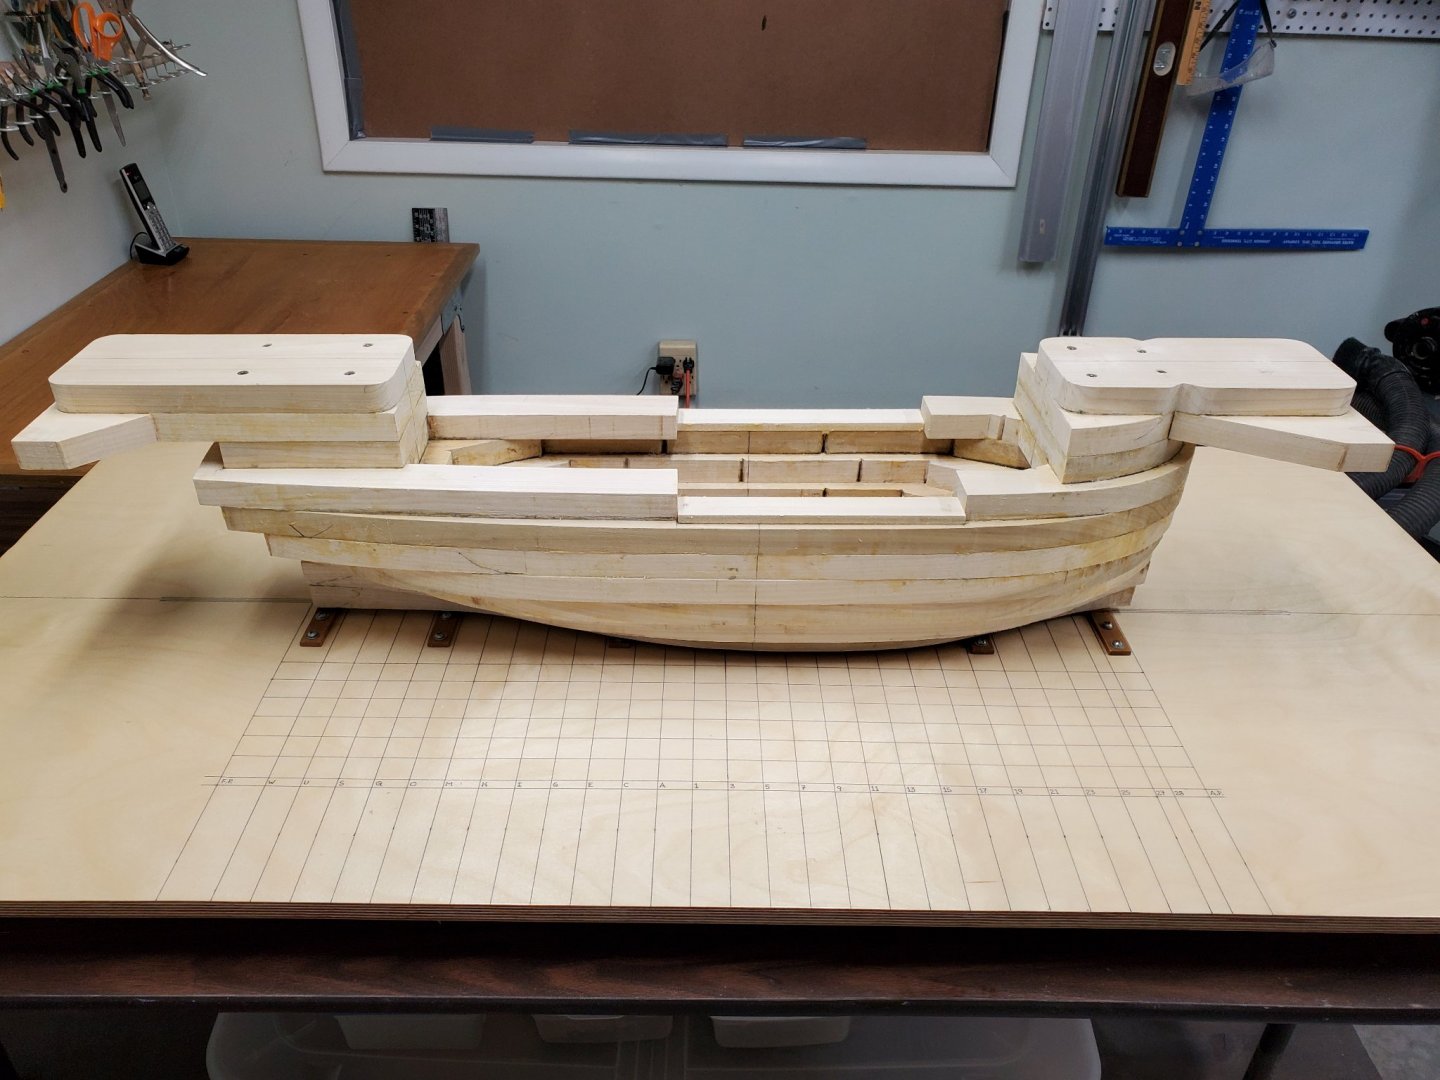 glue-up_completed_1.jpg